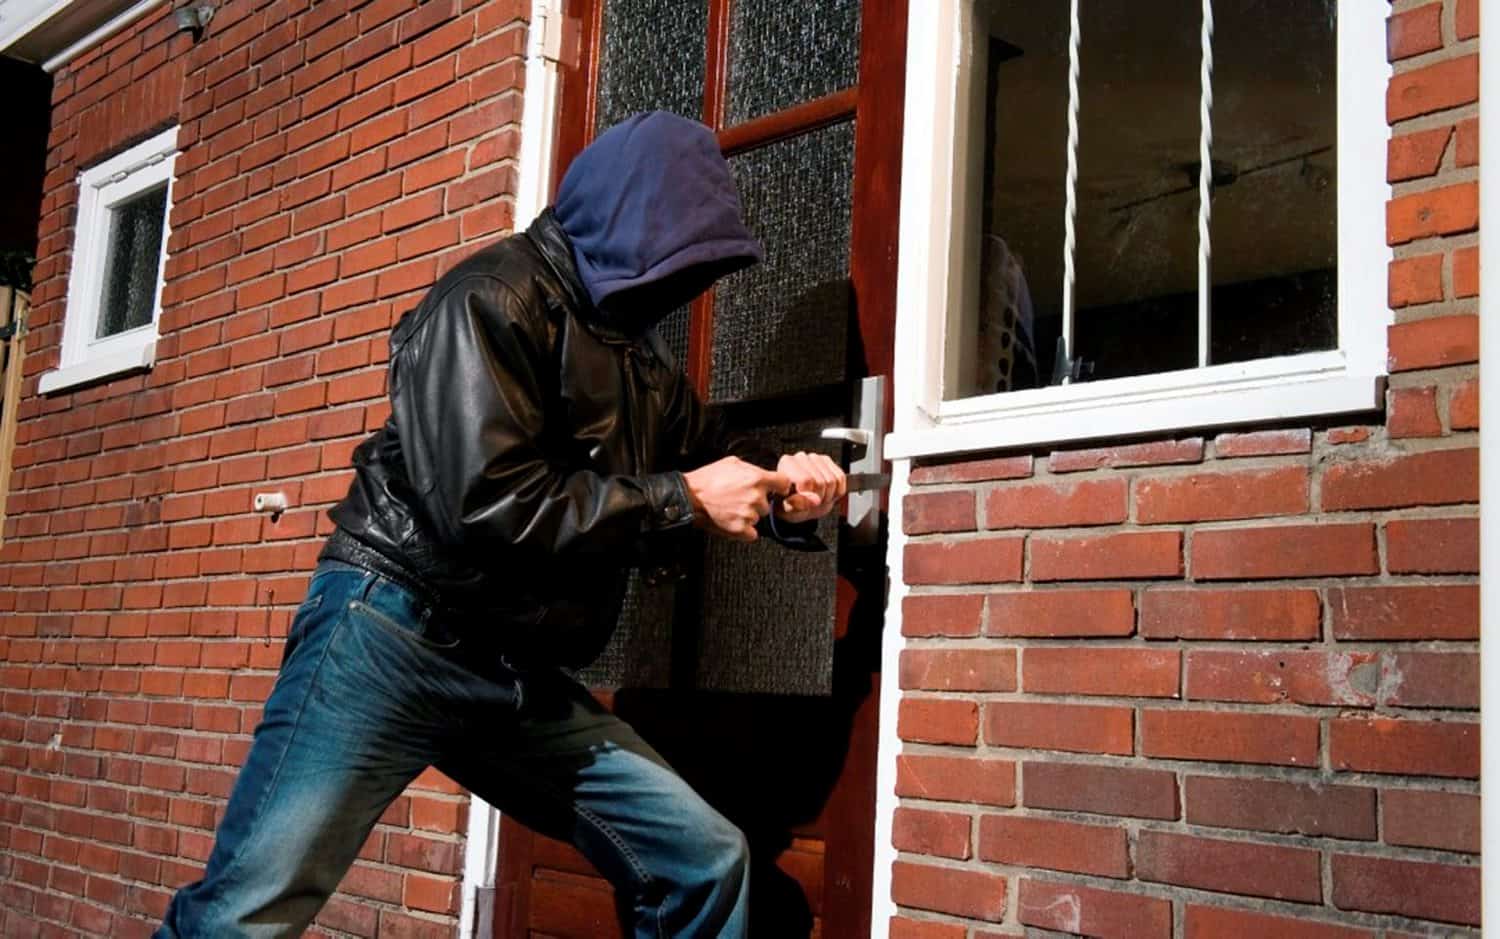 Burglar Breaking into a House - Get a DIY Home Security System